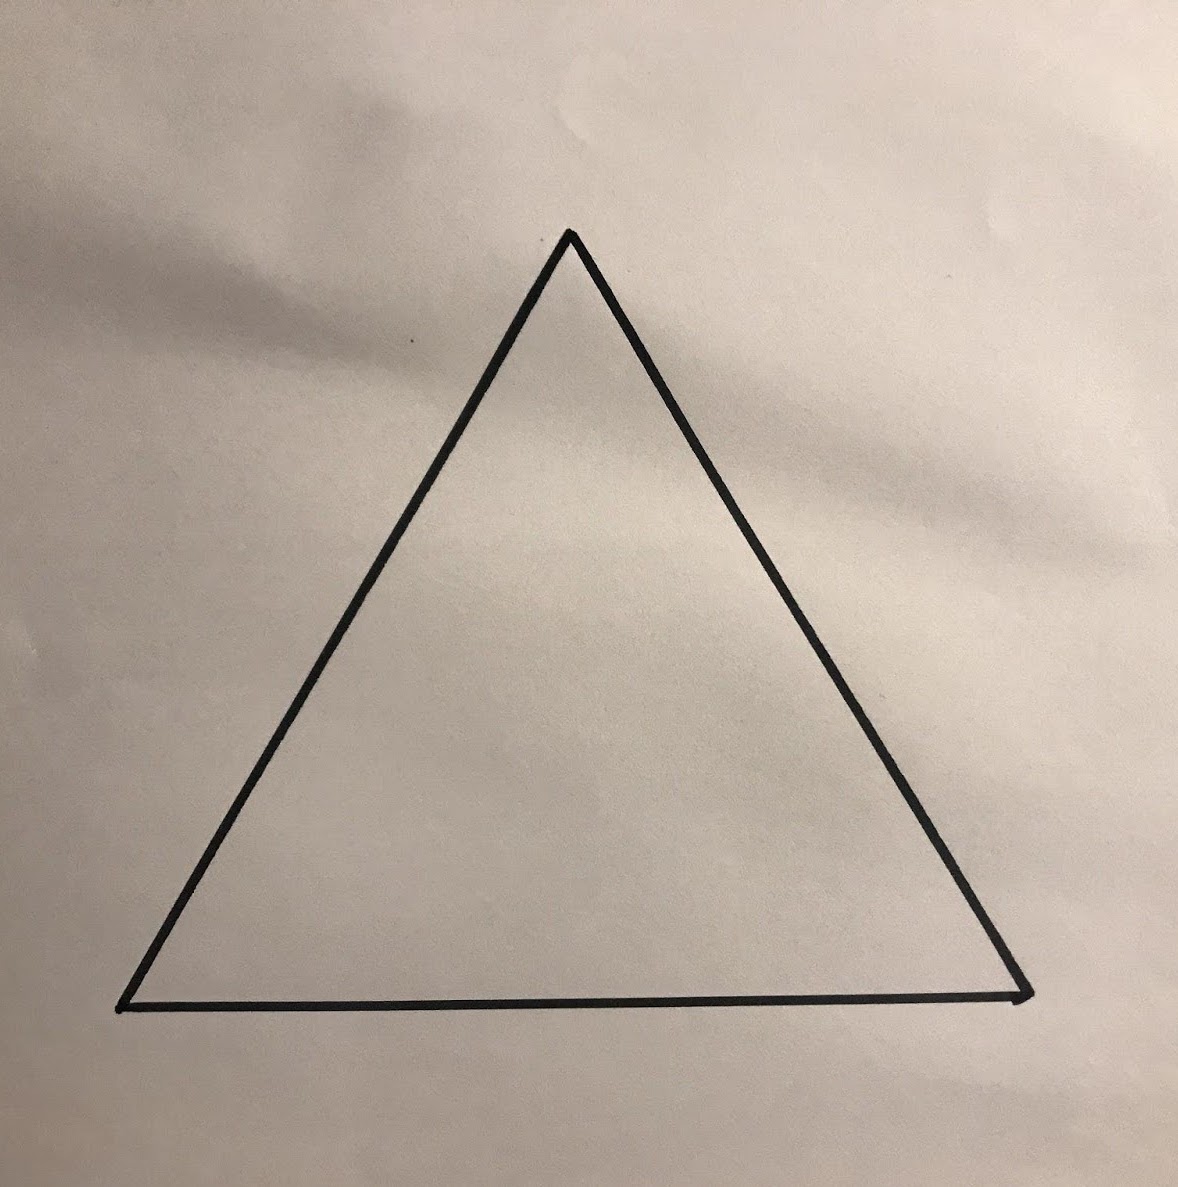 Outline sketch of an equilateral triangle.